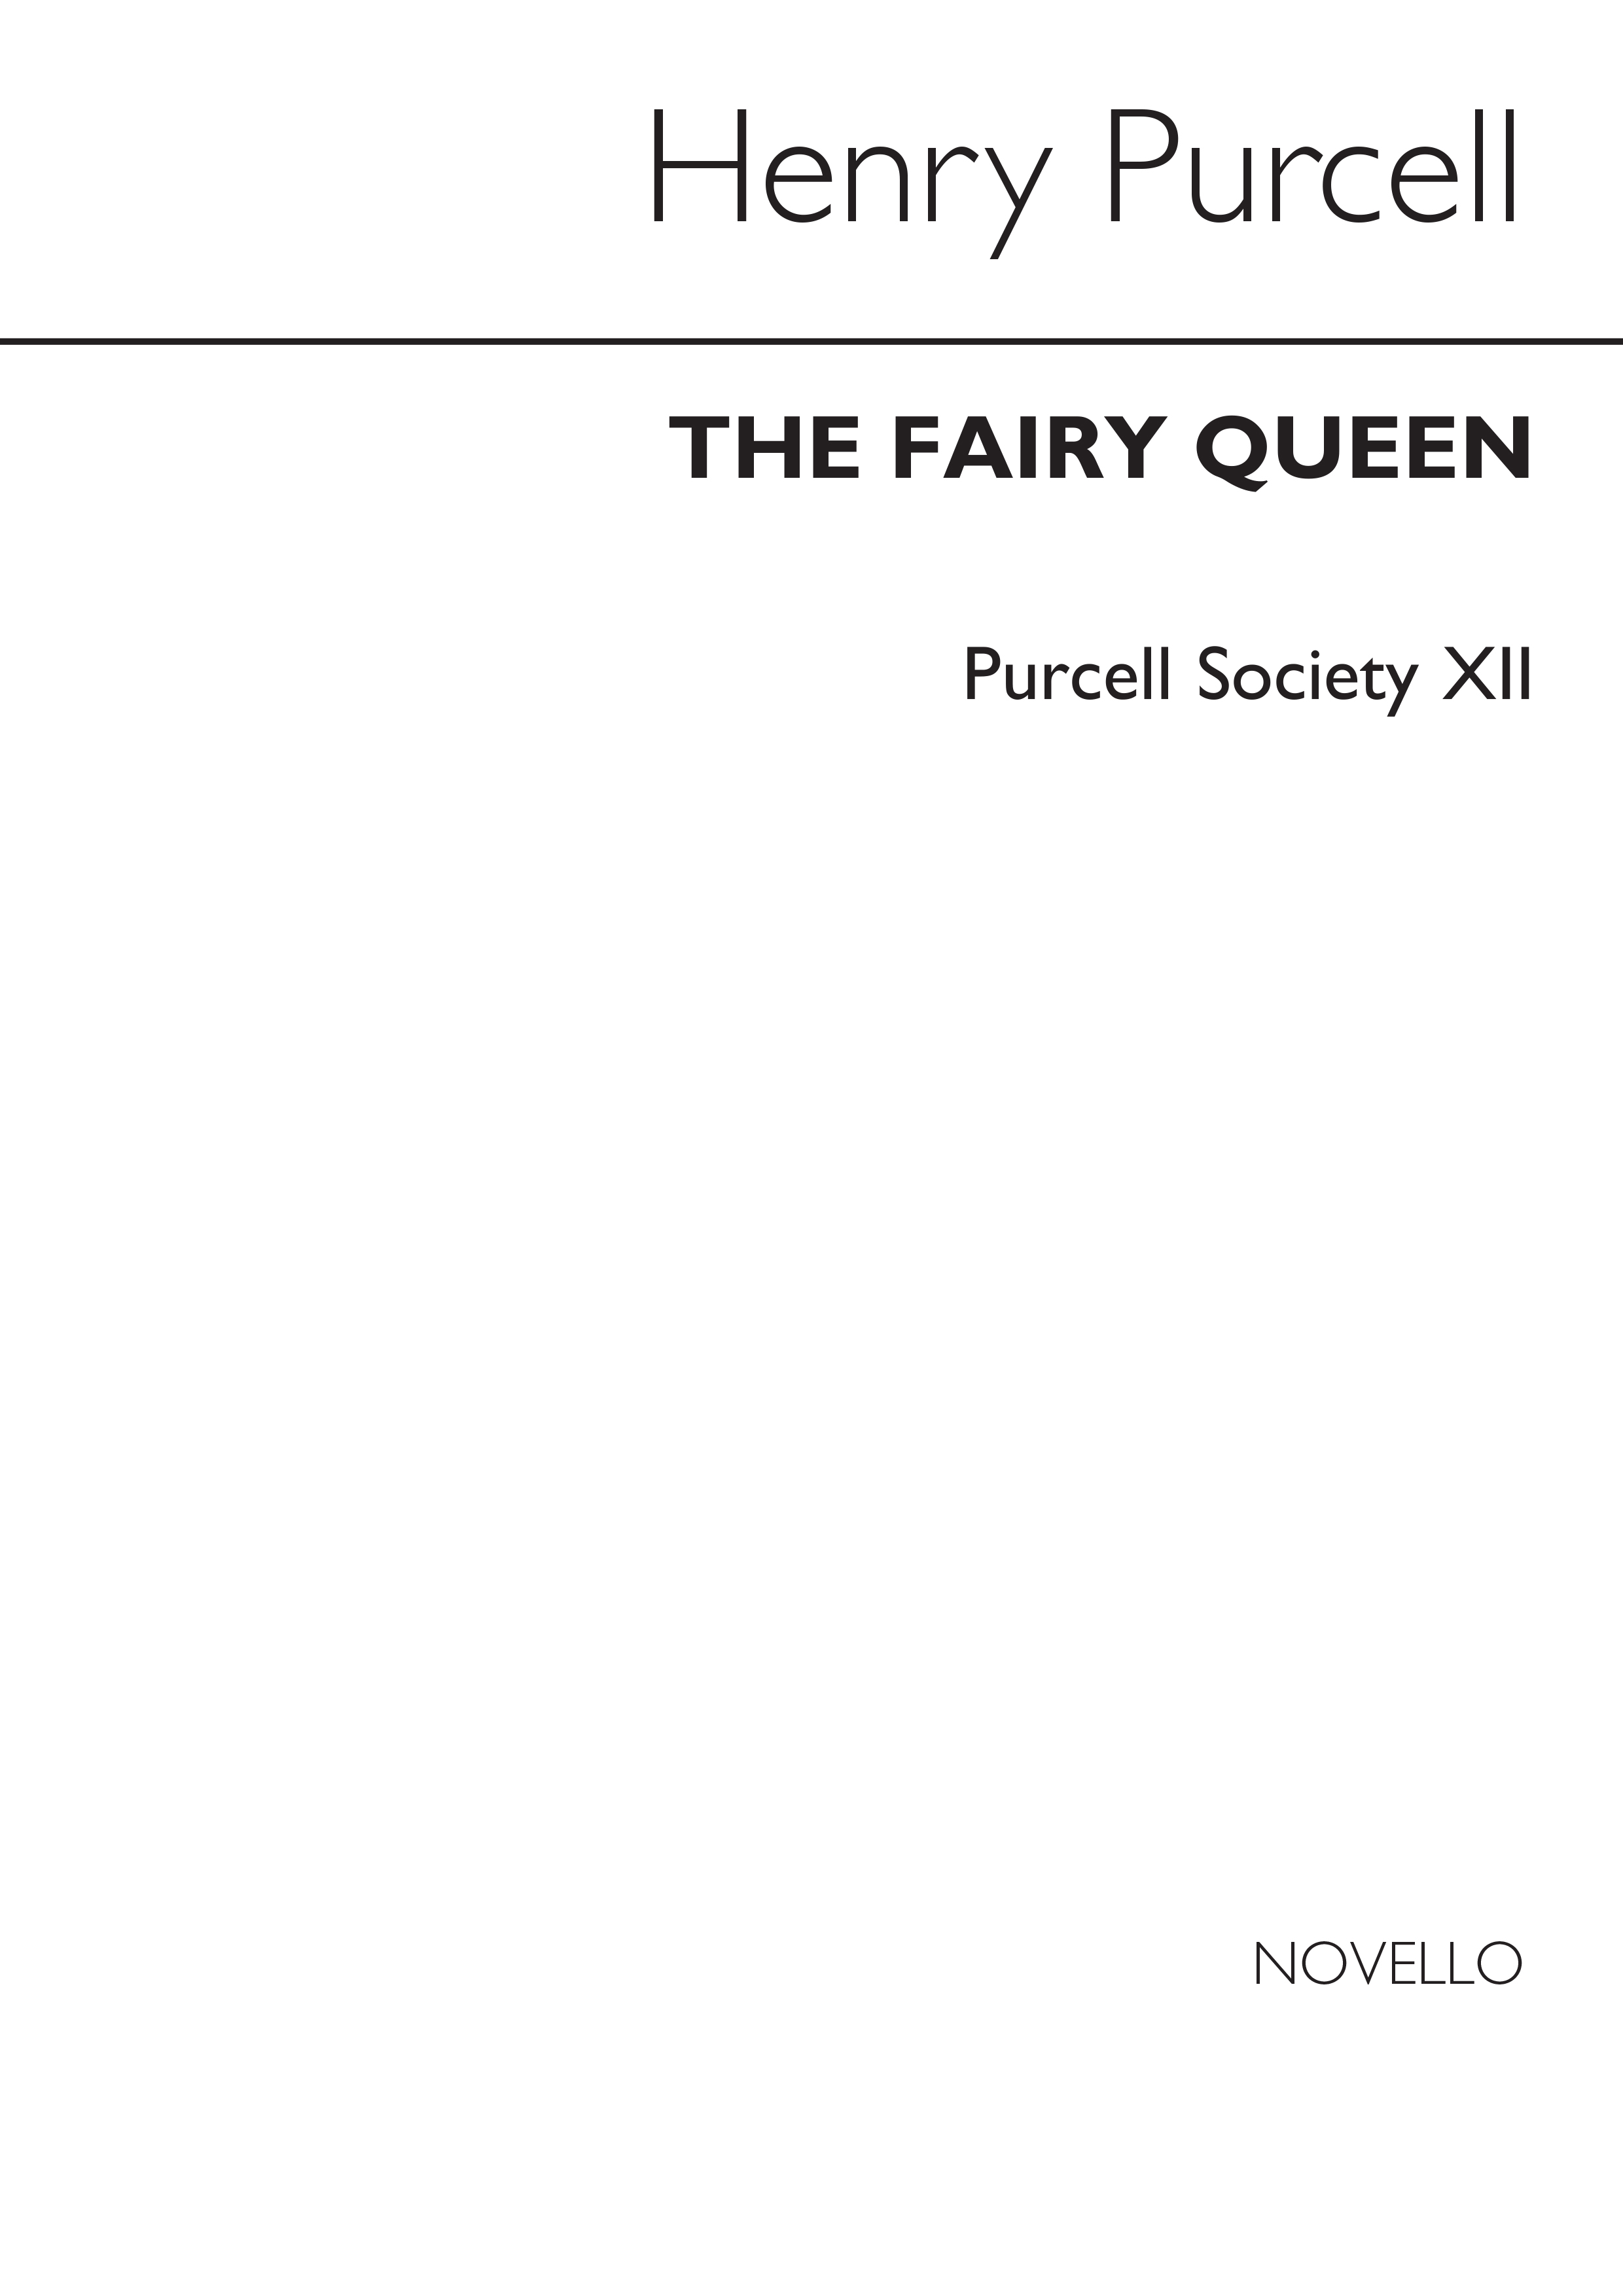 Henry Purcell: Purcell Society Volume 12 - The Fairy Queen: Opera: Score